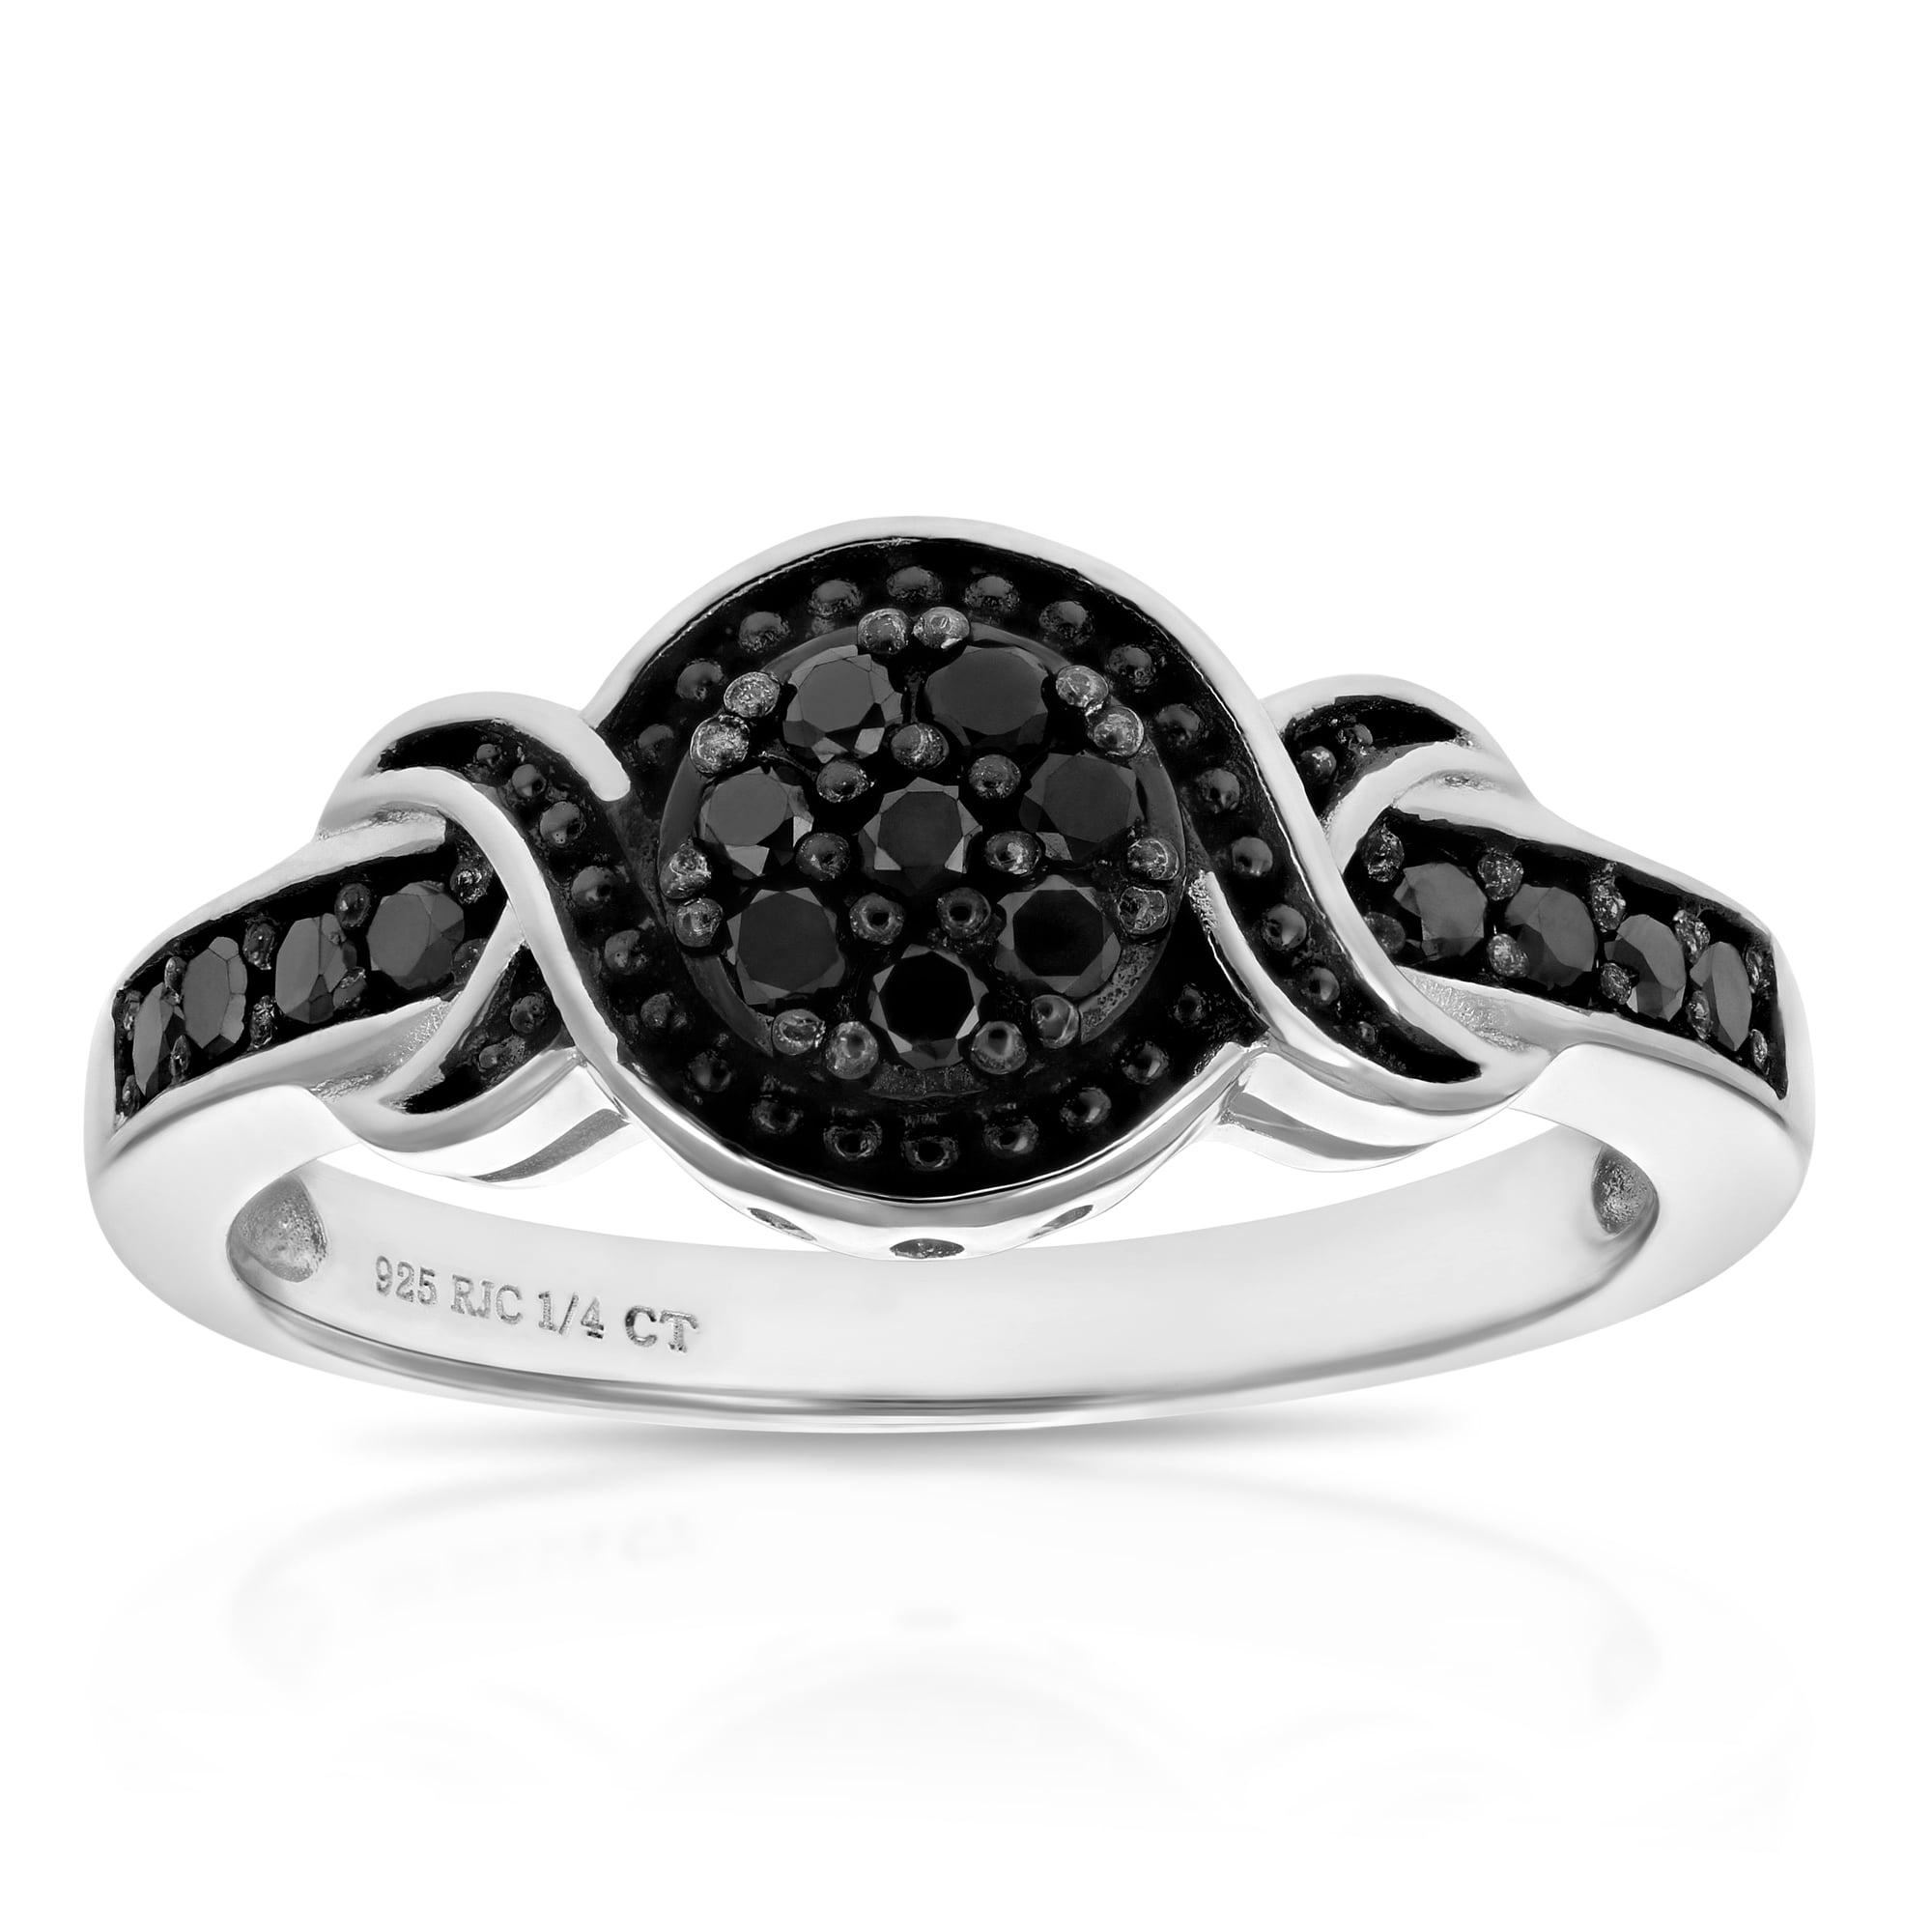 1/5 cttw Black Diamond Ring Wedding Band in .925 Sterling Silver 13 Stones Round